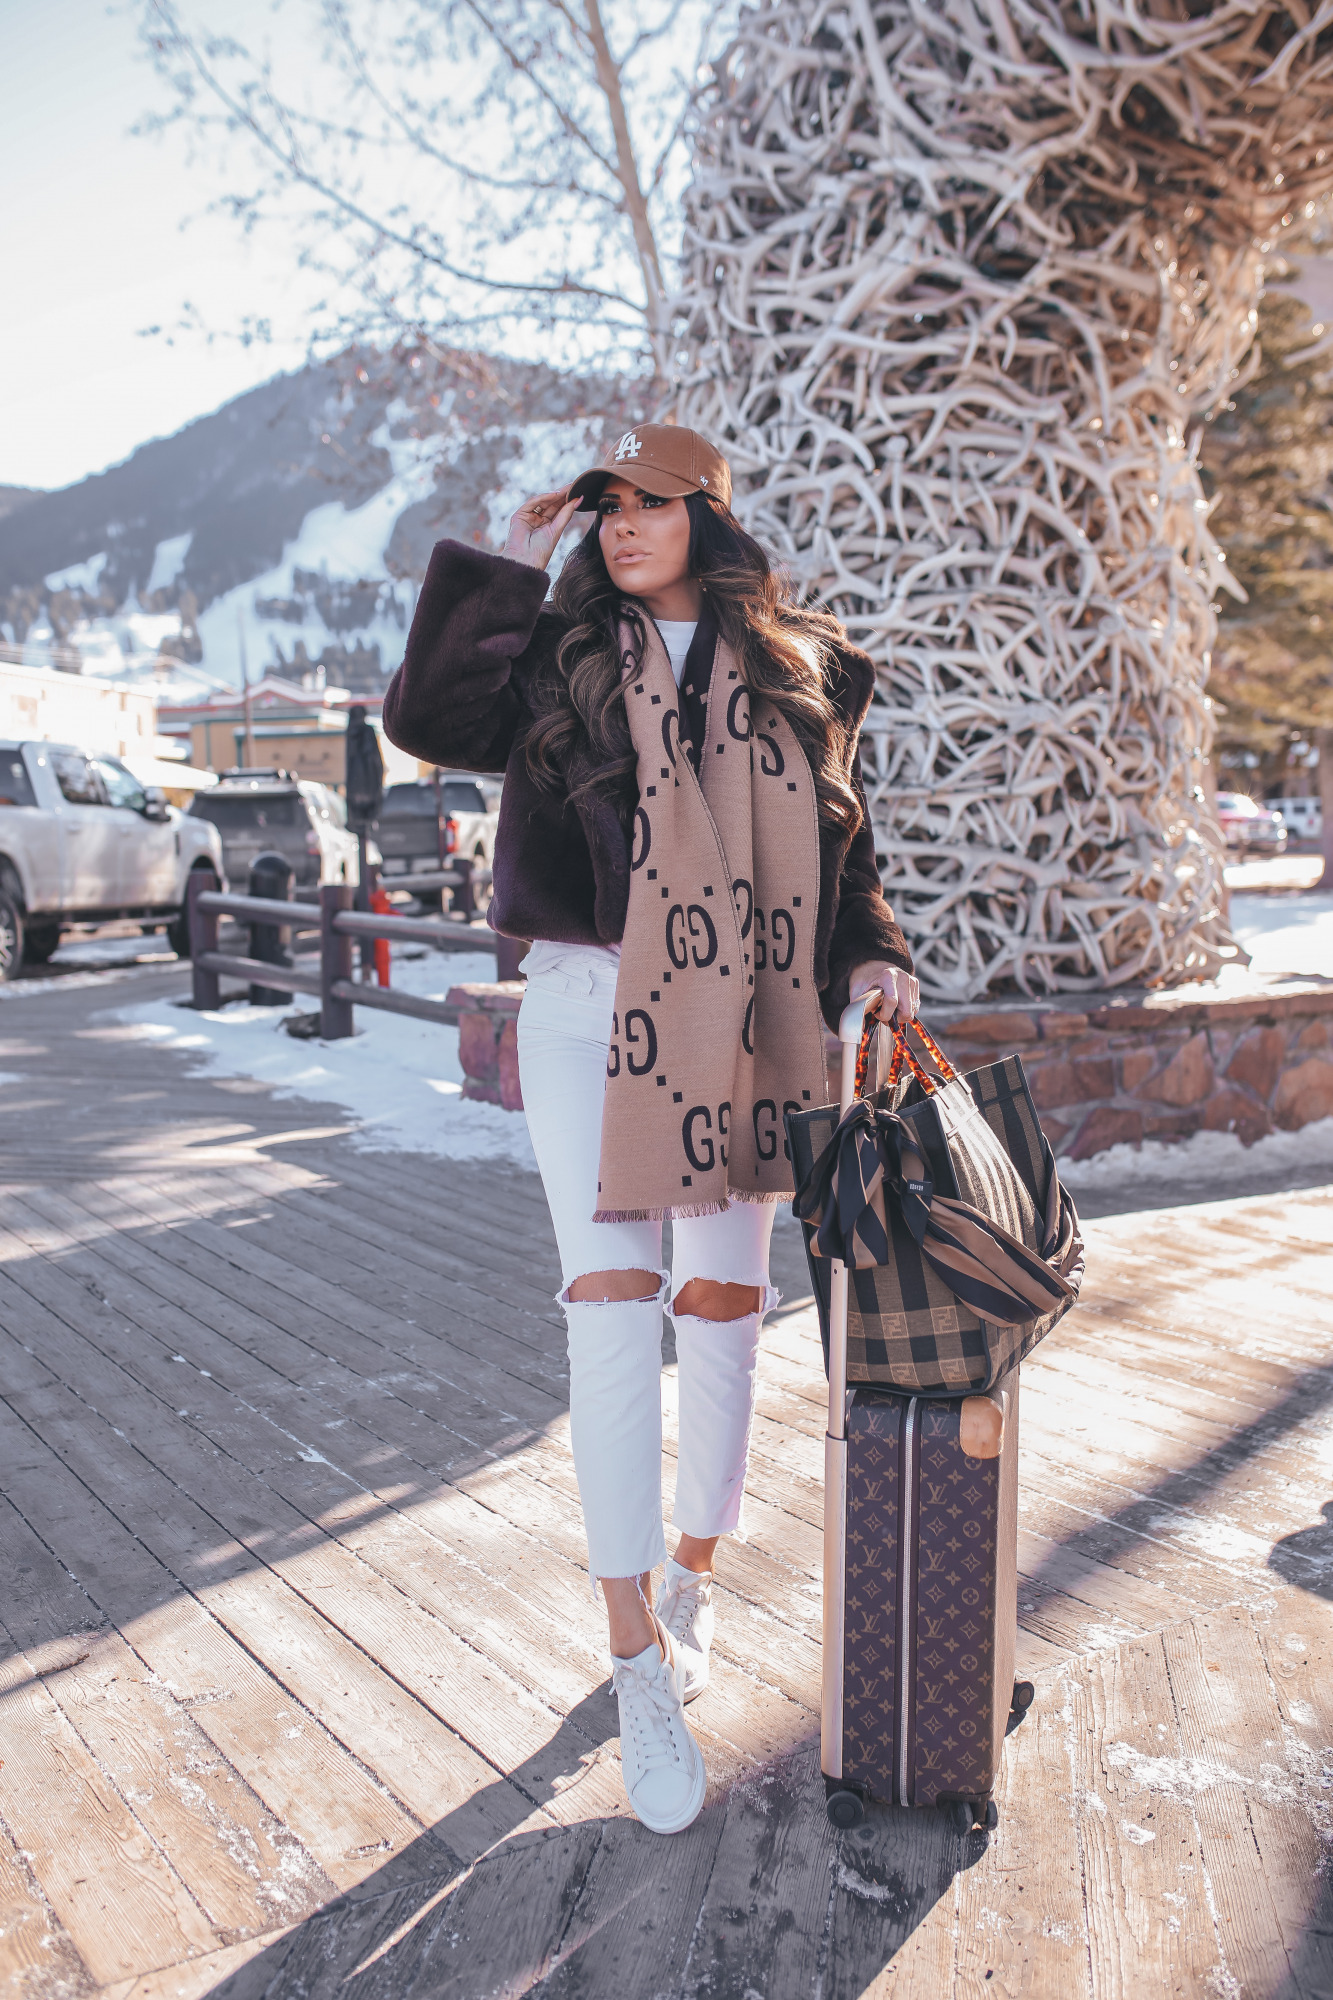 winter fashion outfit ideas, gucci jacquAed wool silk scarf, LA carharrt cap, Jackson hole fashion blog |Winter Fashion by popular US fashion blog, The Sweetest Thing: image of Emily Gemma standing by the antler arch in Jackson Hole, WY and wearing a Free People top, BB Dakota faux fur jacket, distressed white denim jeans, Gucci scarf, '47 brand cap, Le Specs sunglasses, and standing next to a Louis Vuitton rolling suitcase and holding a Fendi tote bag. 